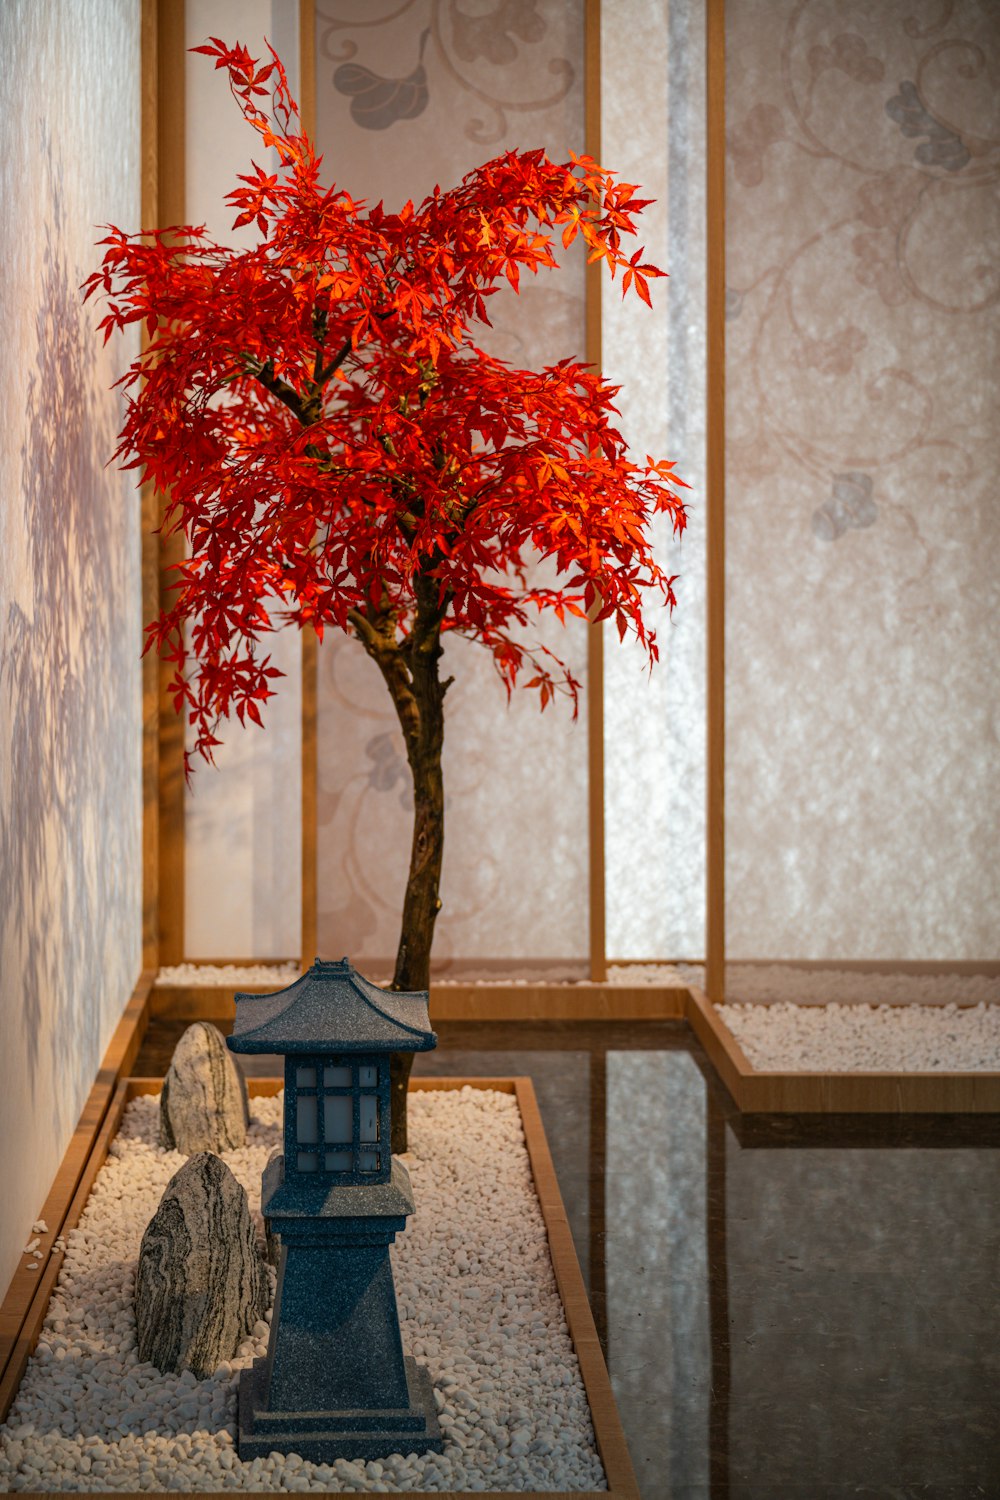 a bonsai tree with red leaves in a room